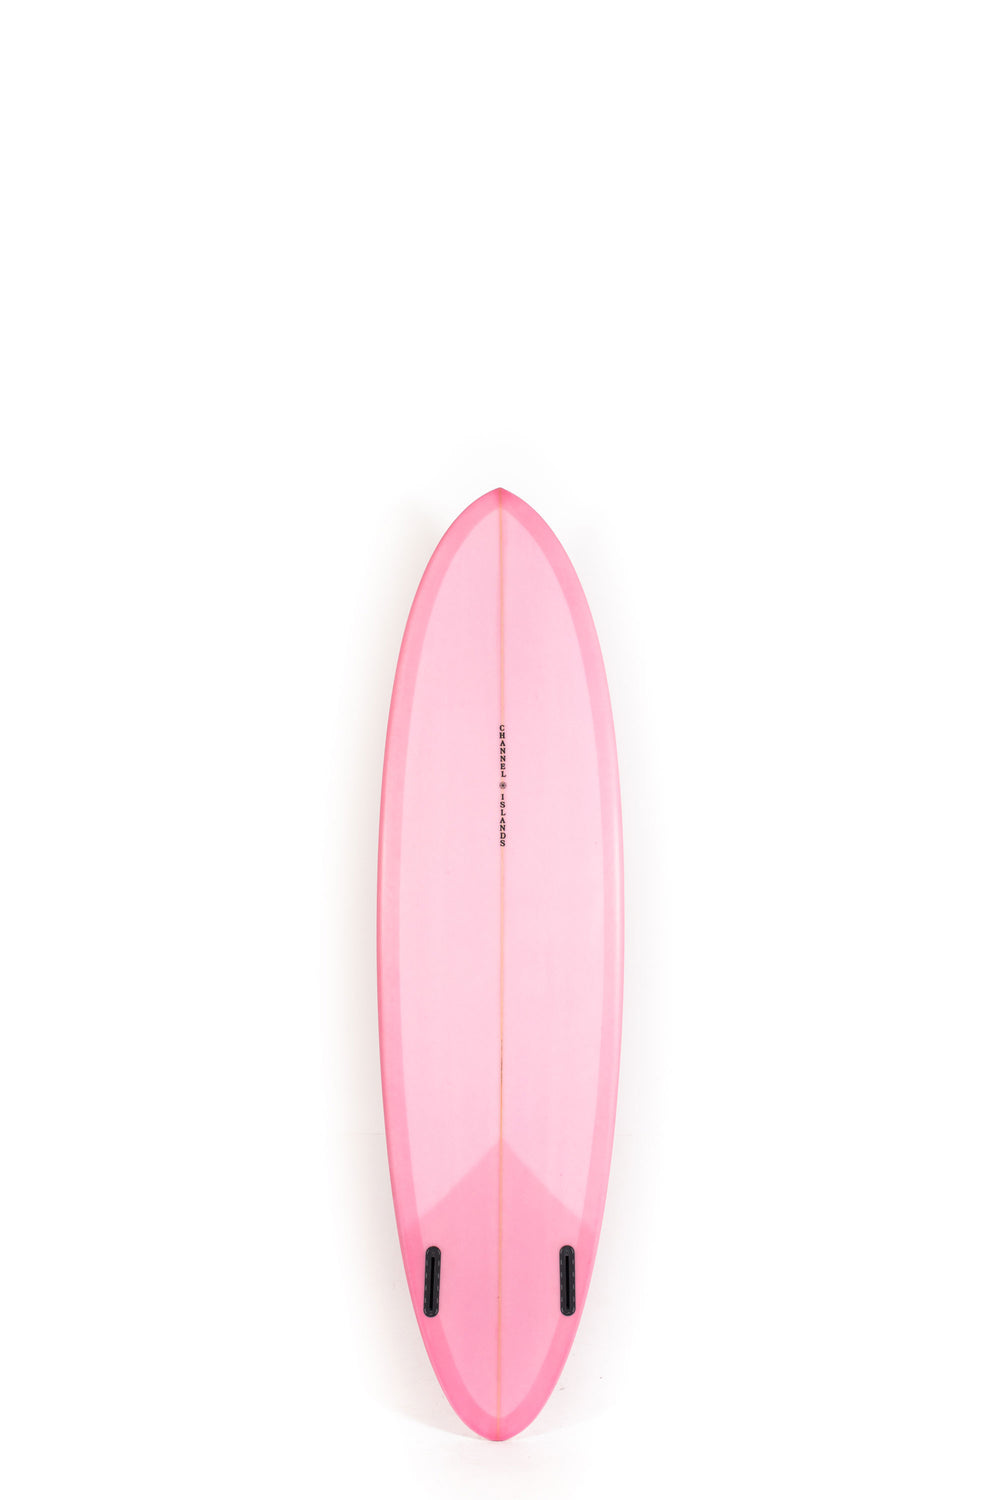 Channel Islands | CI MID | Buy at PUKAS SURF SHOP